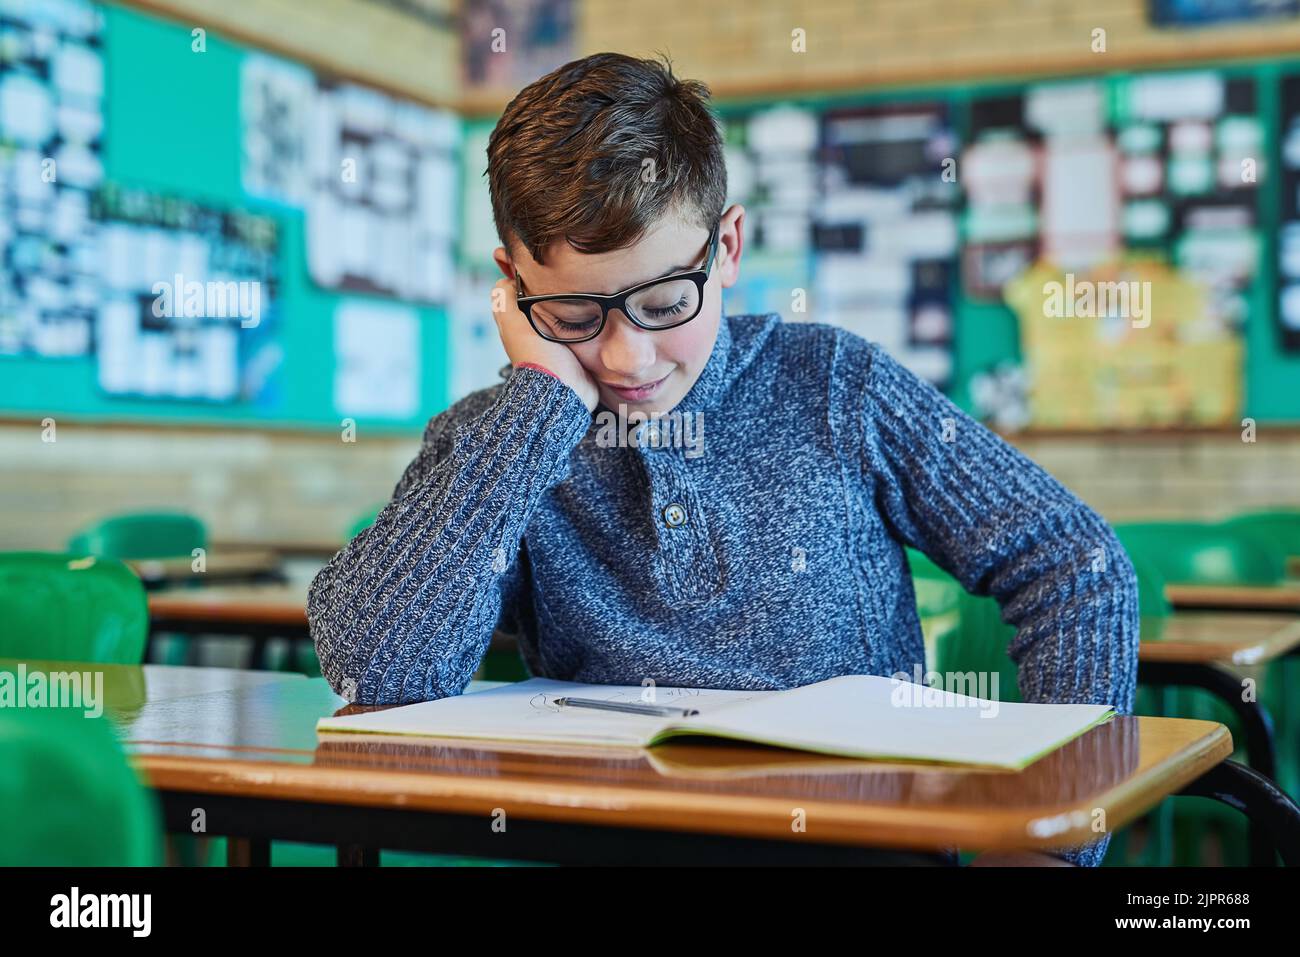 Catching a sneaky snooze. an elementary school boy sleeping at his desk in class. Stock Photo